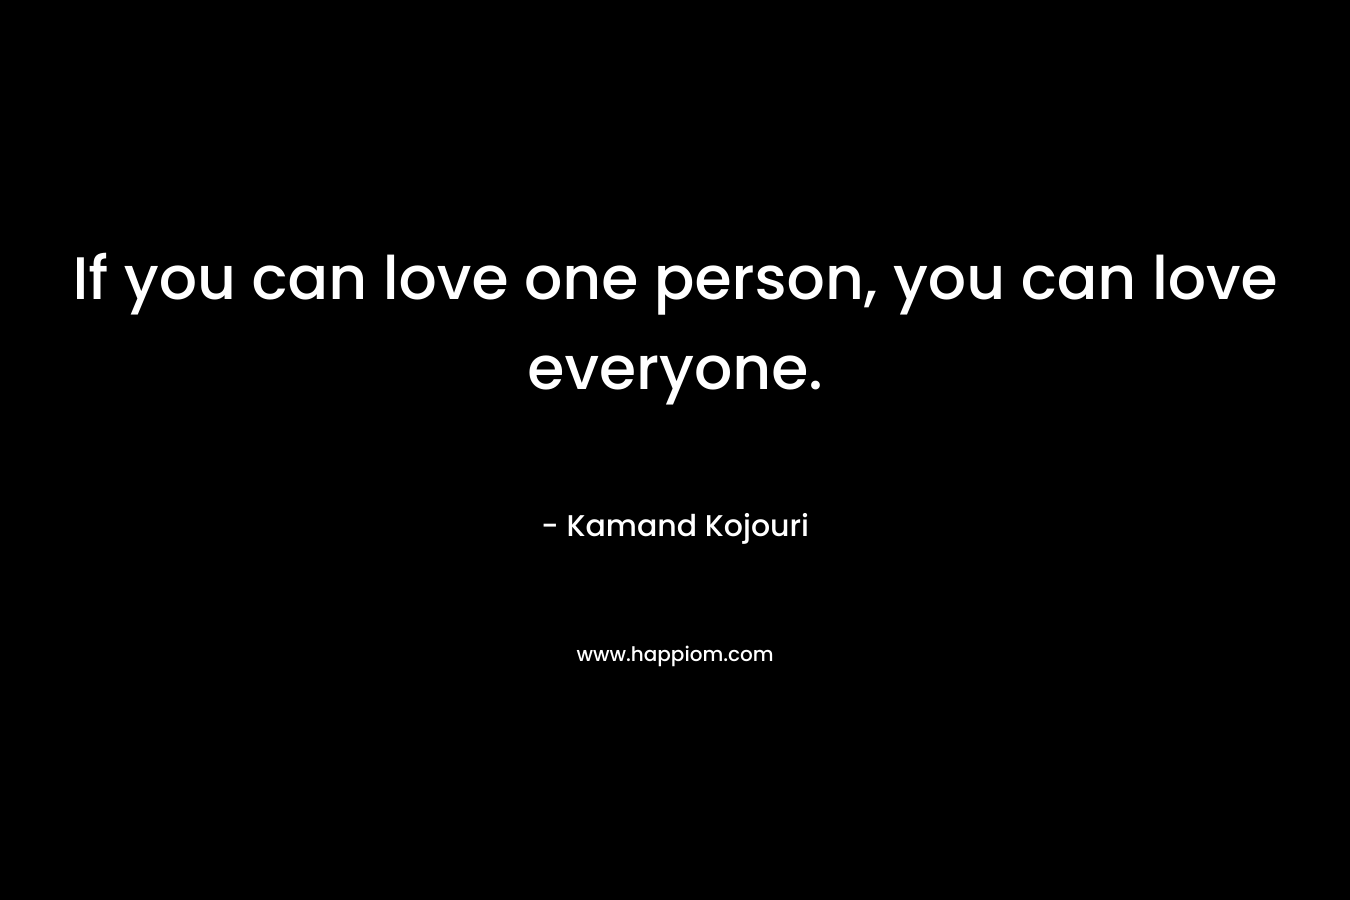 If you can love one person, you can love everyone.